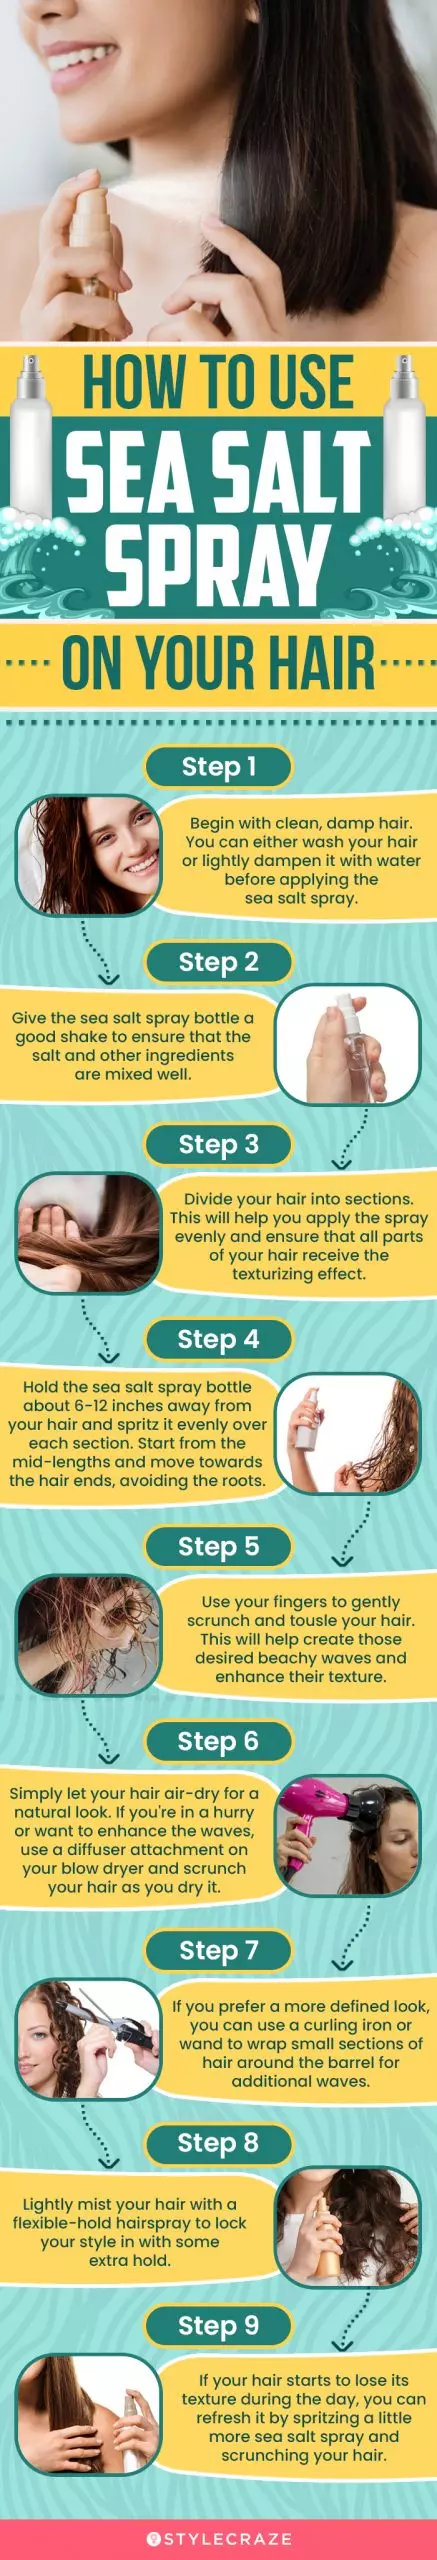 How To Use Sea Salt Spray On Your Hair (infographic)